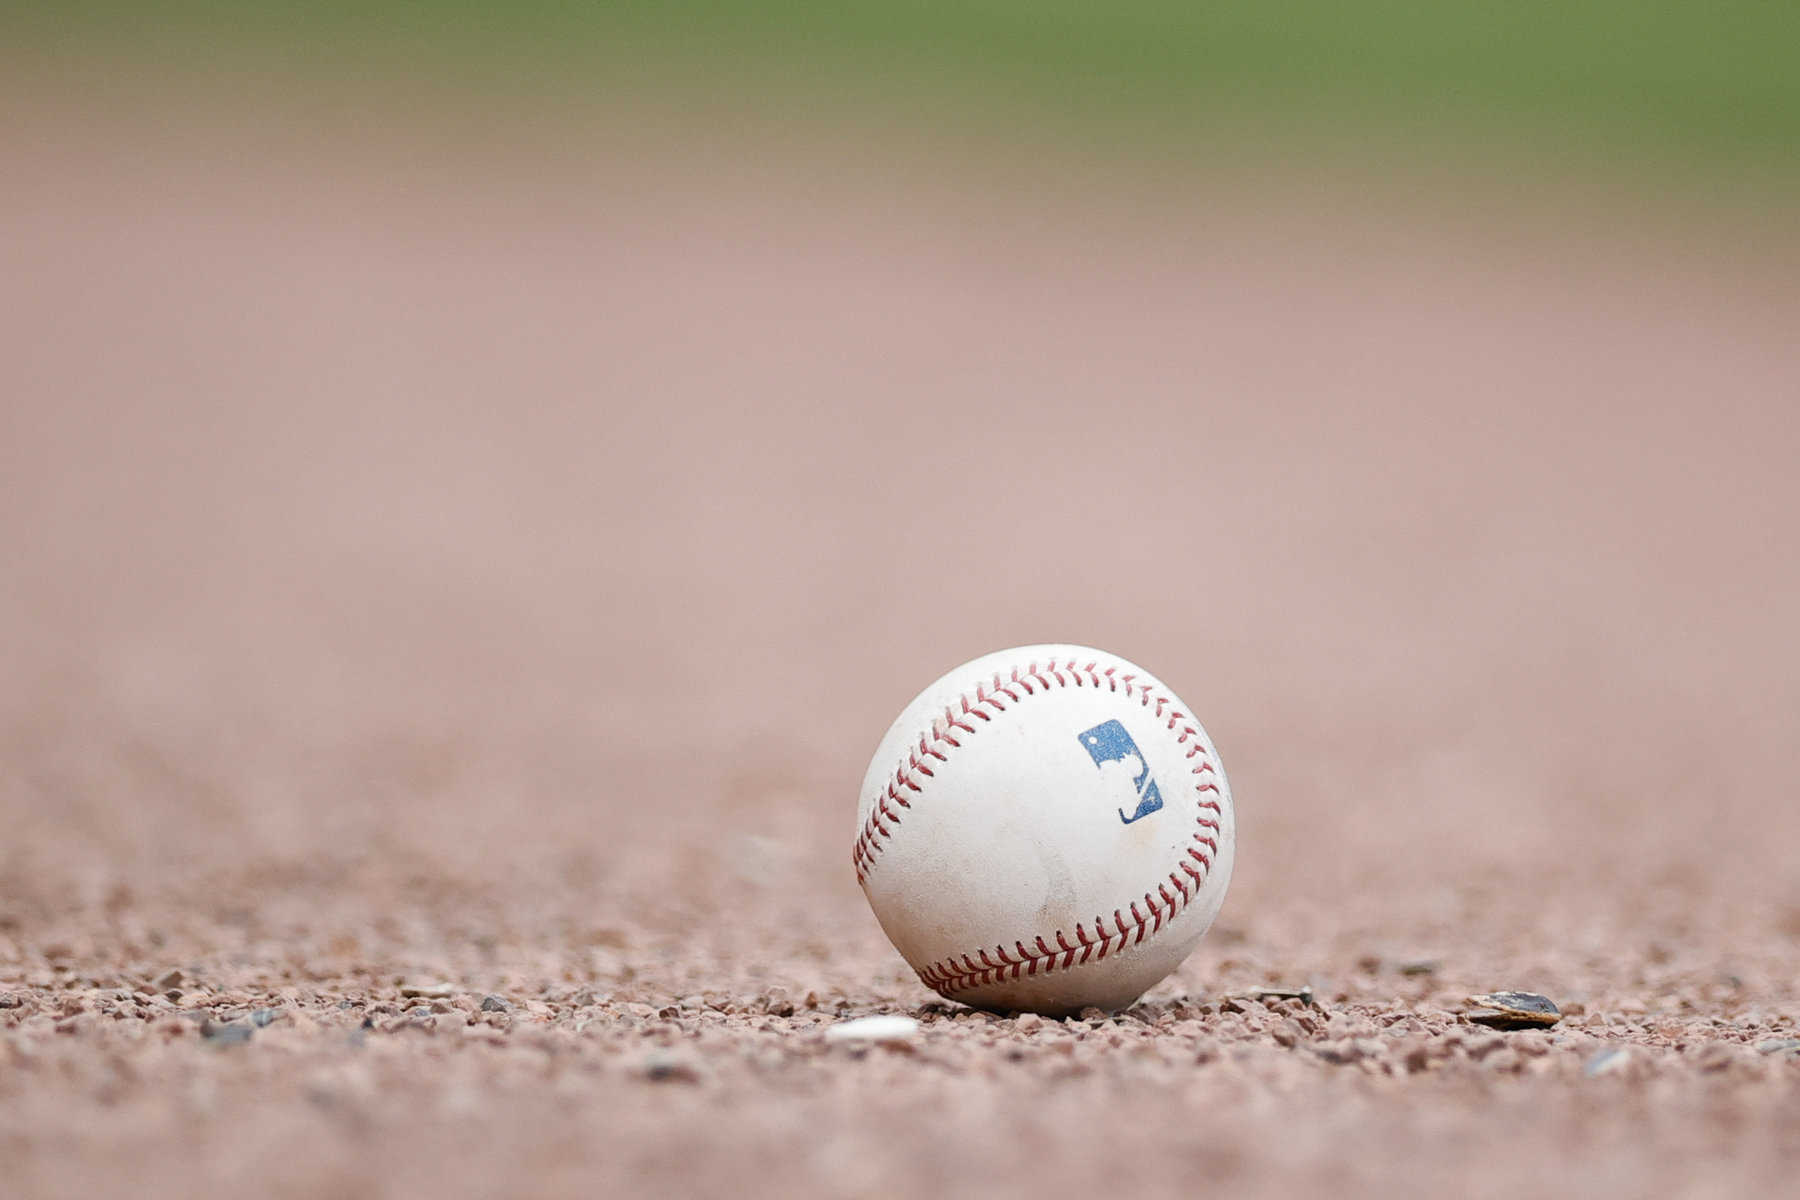 MLB DFS Punt Plays For DraftKings and FanDuel (April 15)